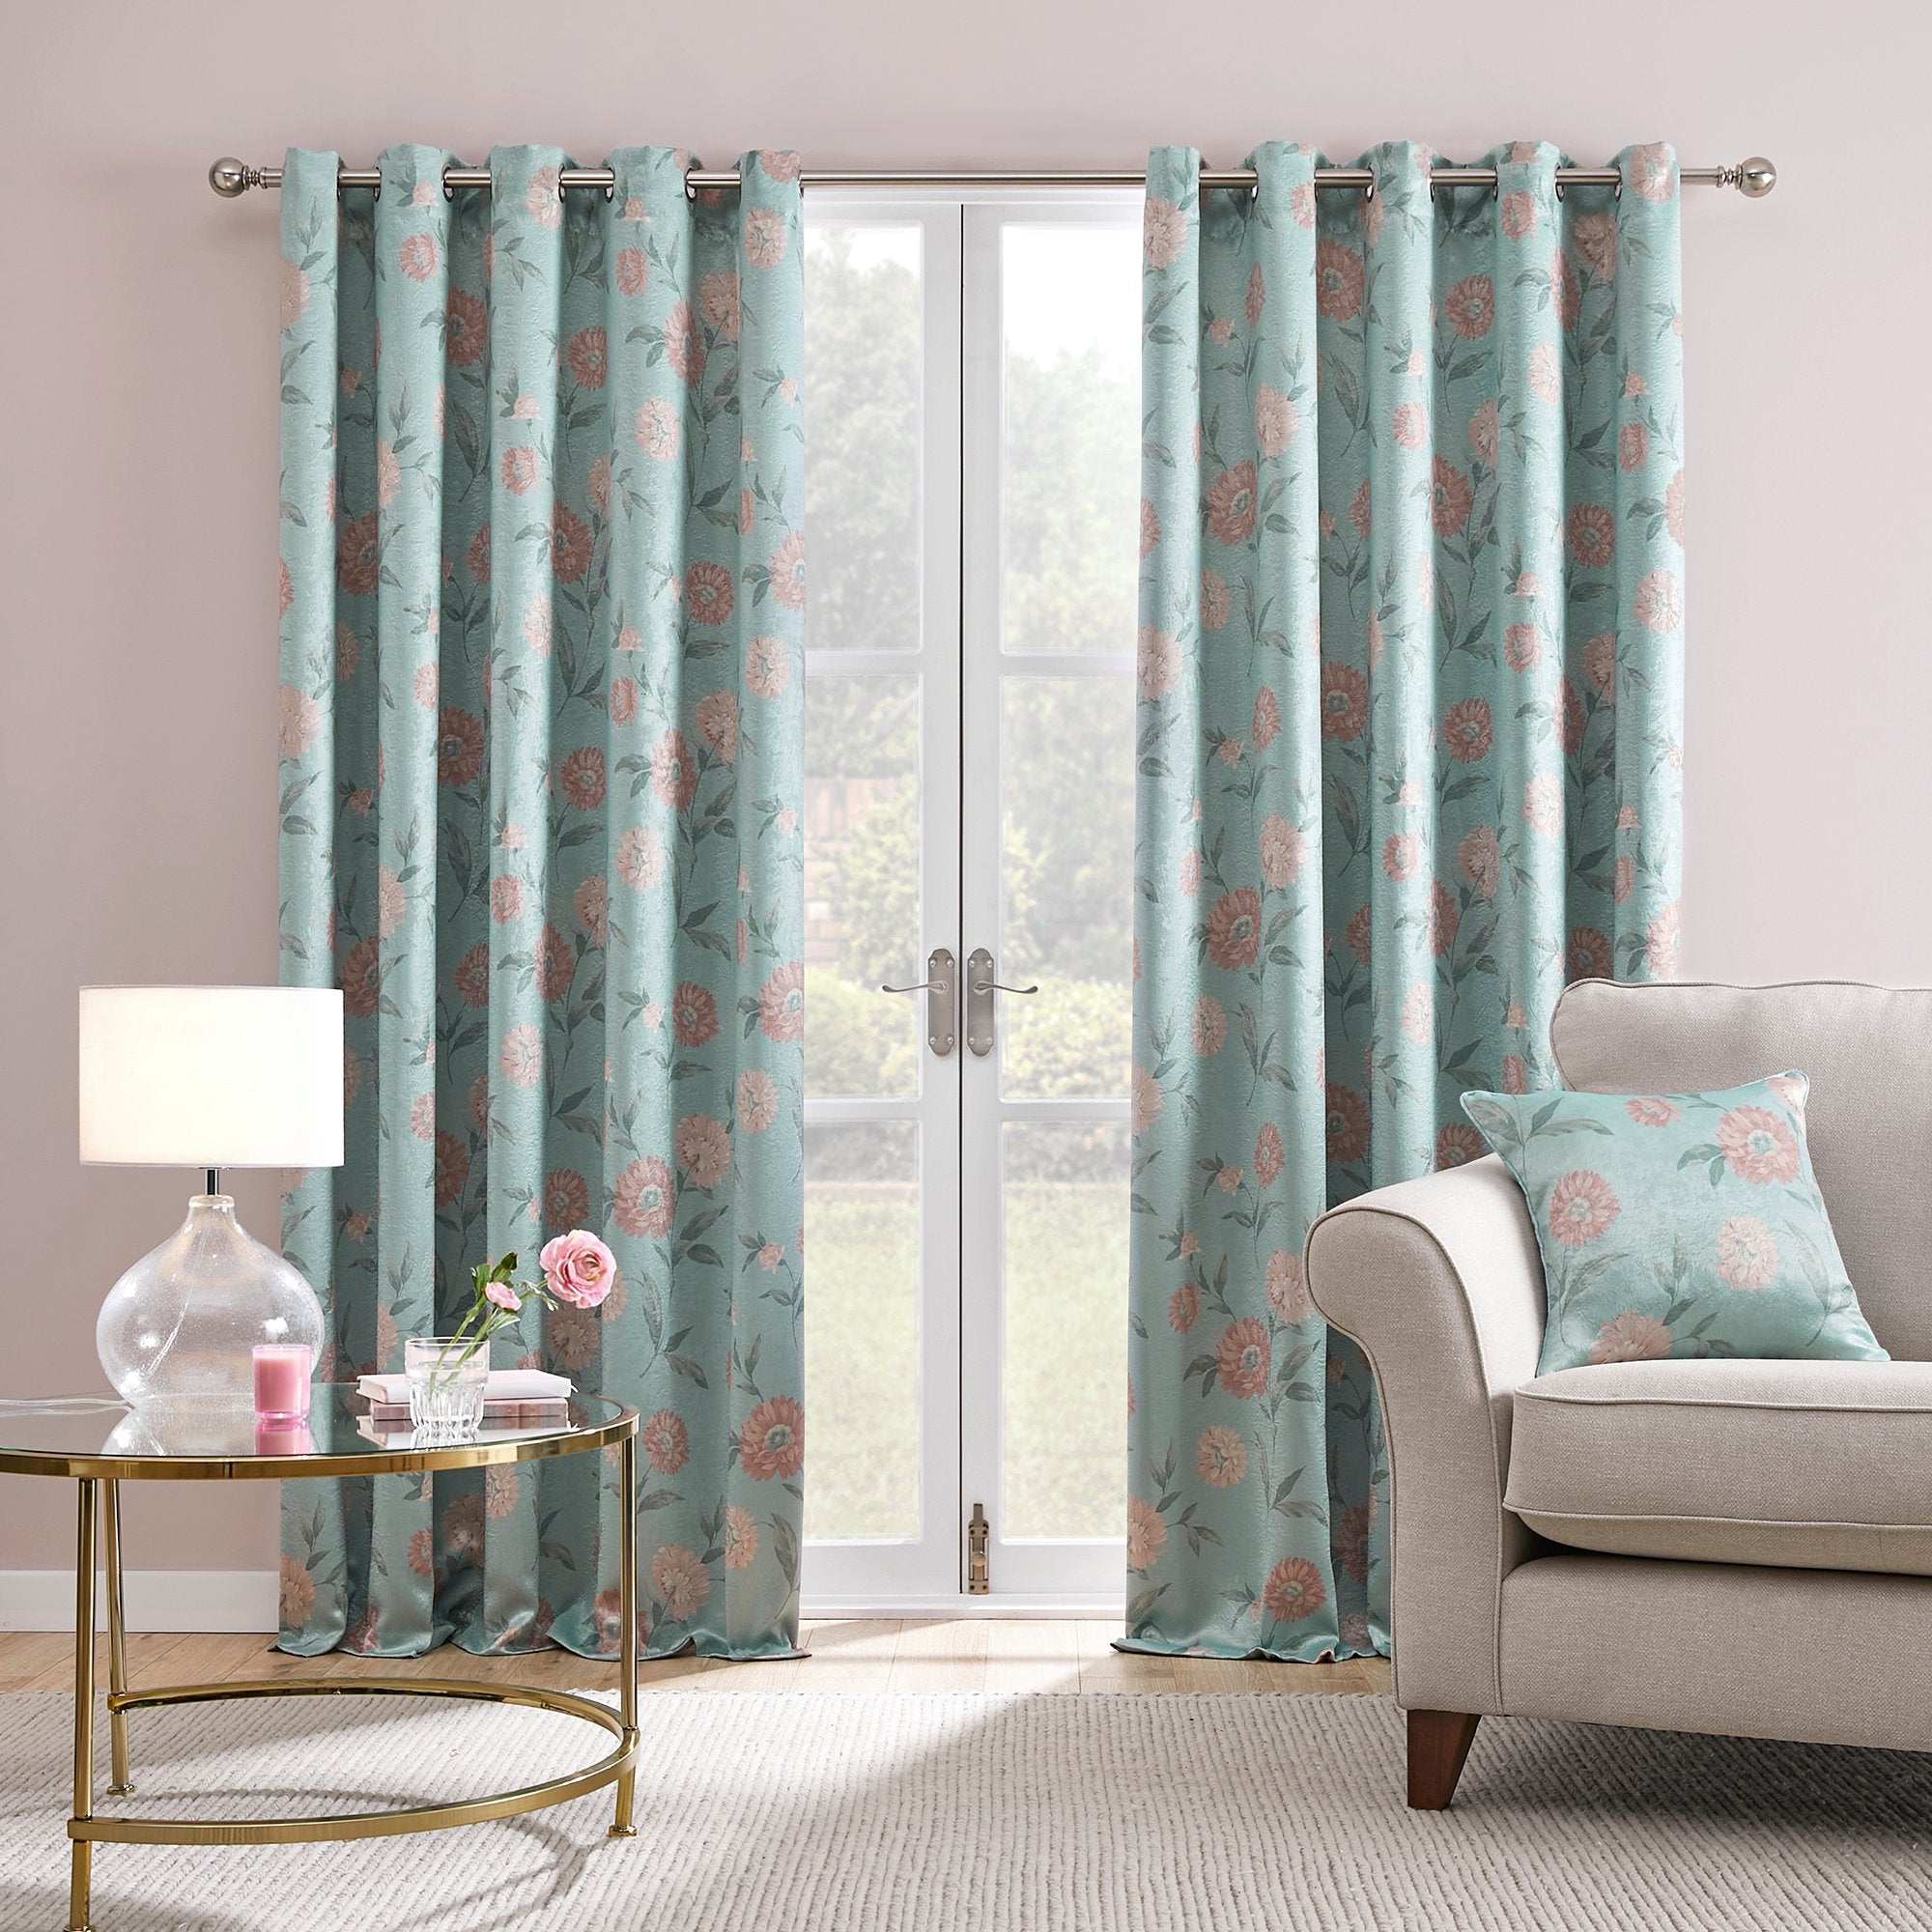 Pair of Eyelet Curtains Dahlia by Dreams & Drapes Curtains in Duck Egg